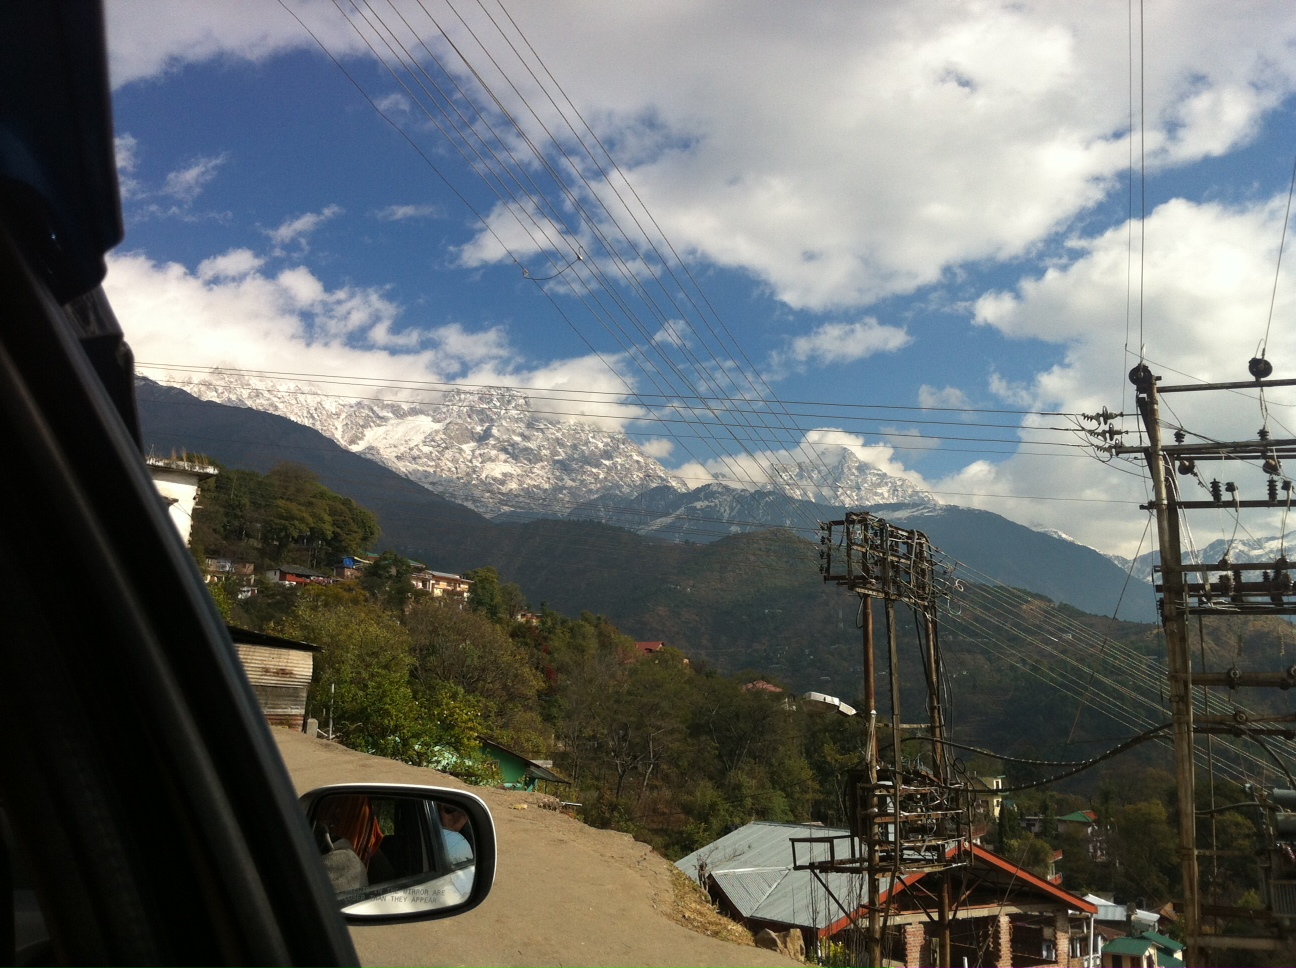 Driving to the Himalayas